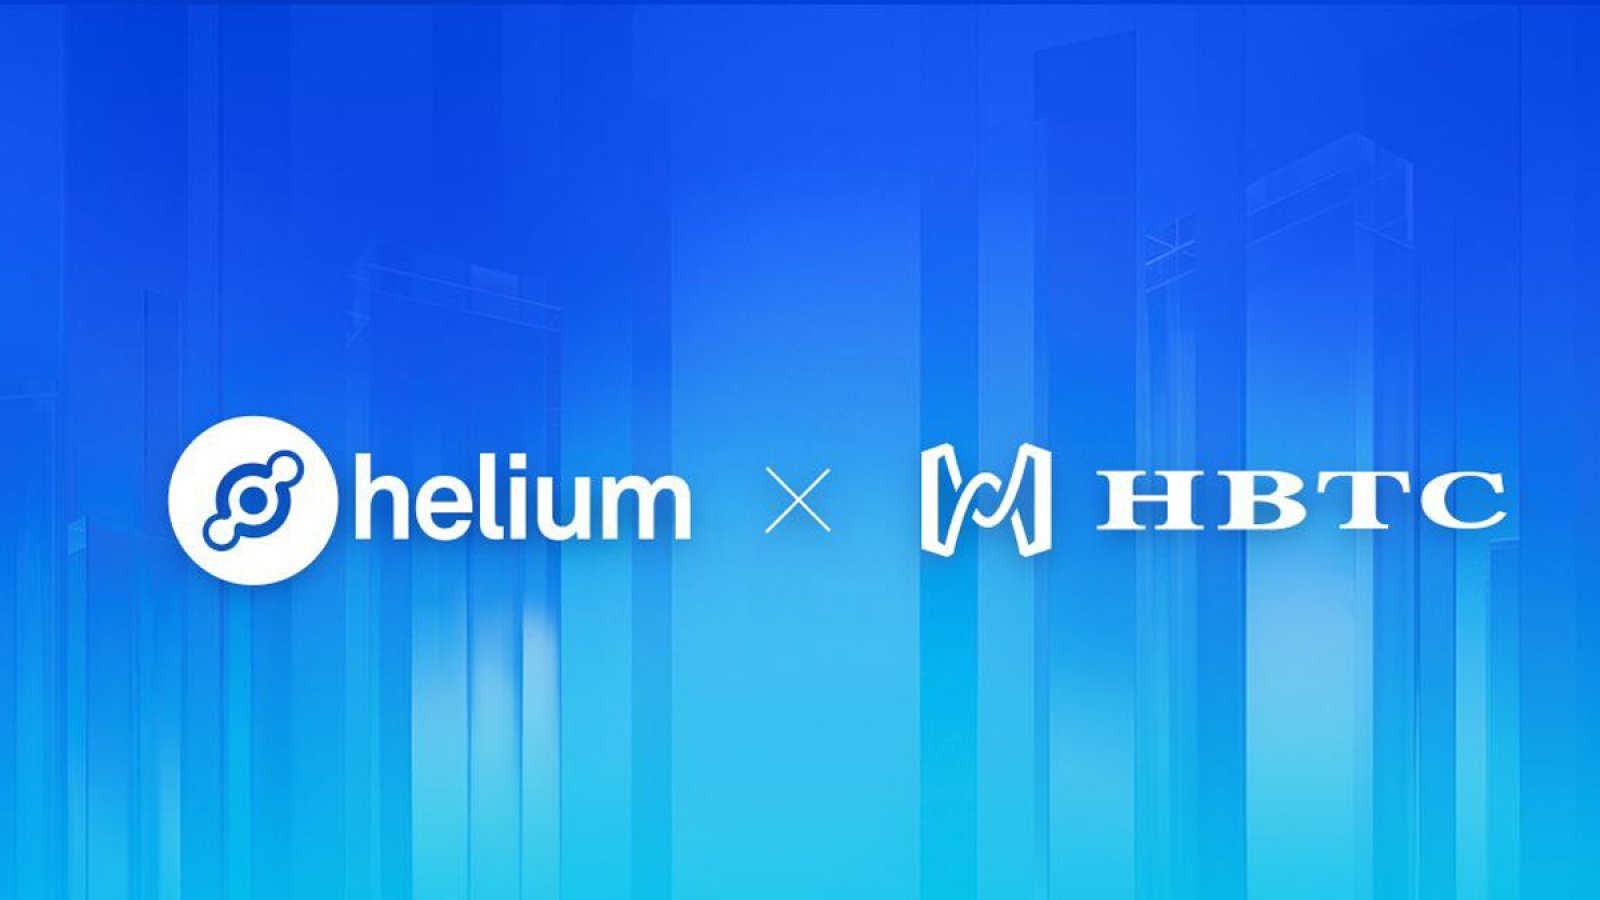 HBTC.com Announces Strategic Partnership to Distribute $HNT Hotspots to Expand the Helium Network in South East Asia 